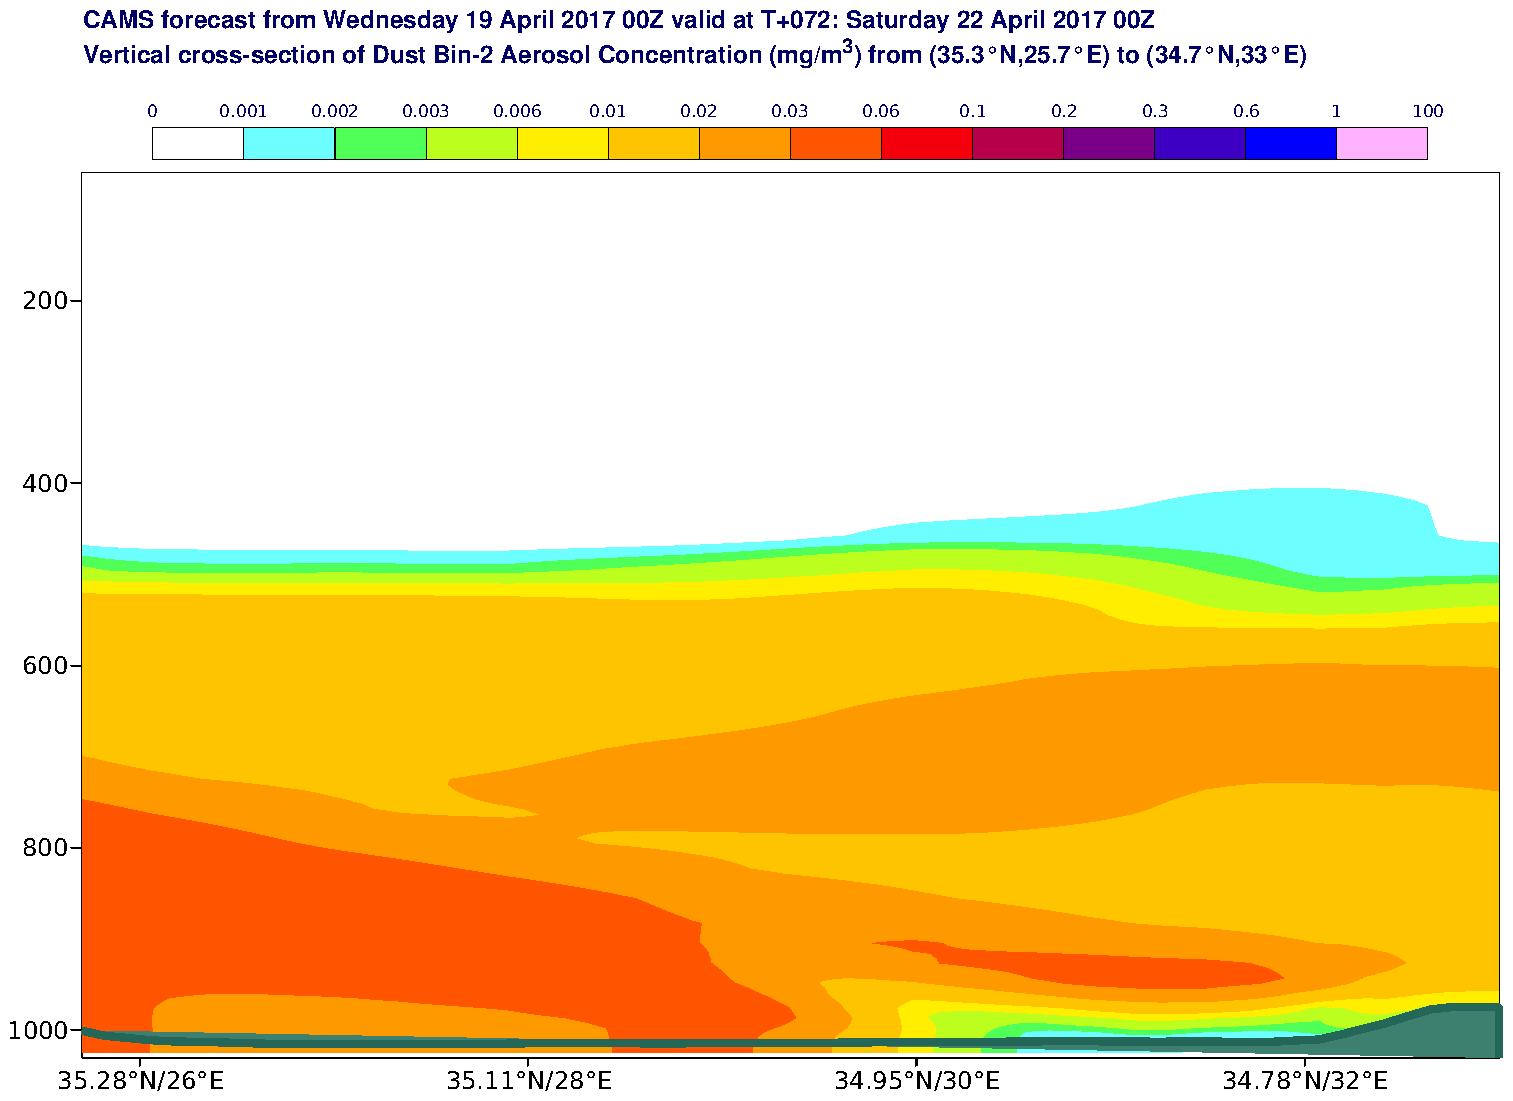 Vertical cross-section of Dust Bin-2 Aerosol Concentration (mg/m3) valid at T72 - 2017-04-22 00:00